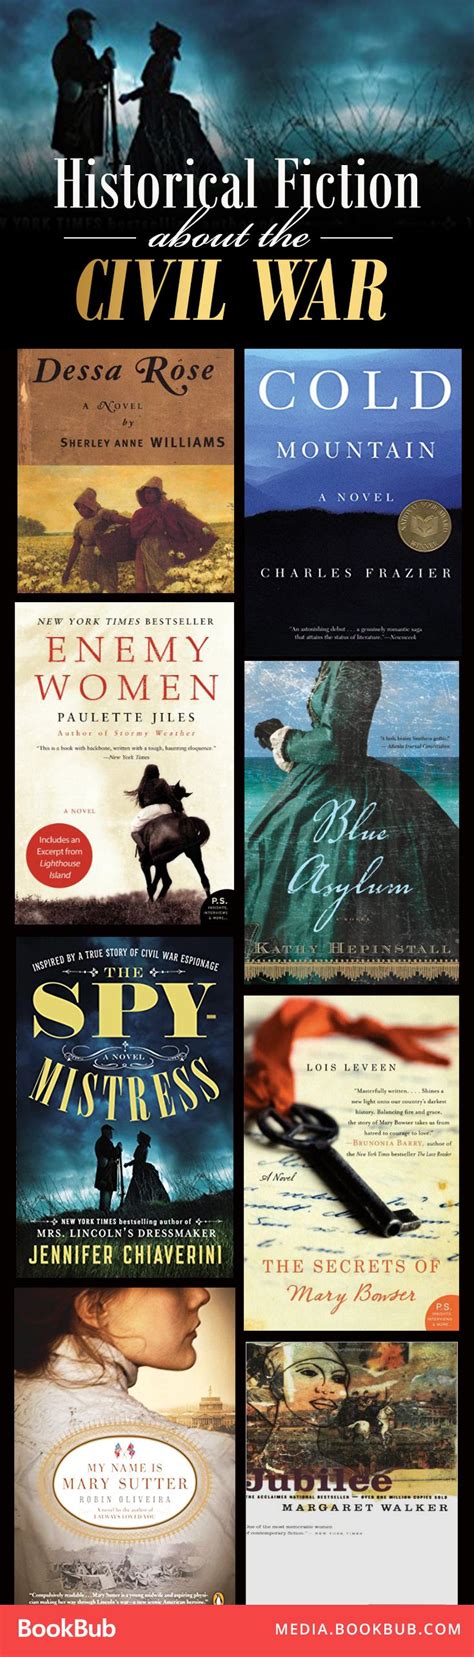 9 historical fiction books about the civil war historical fiction books historical fiction